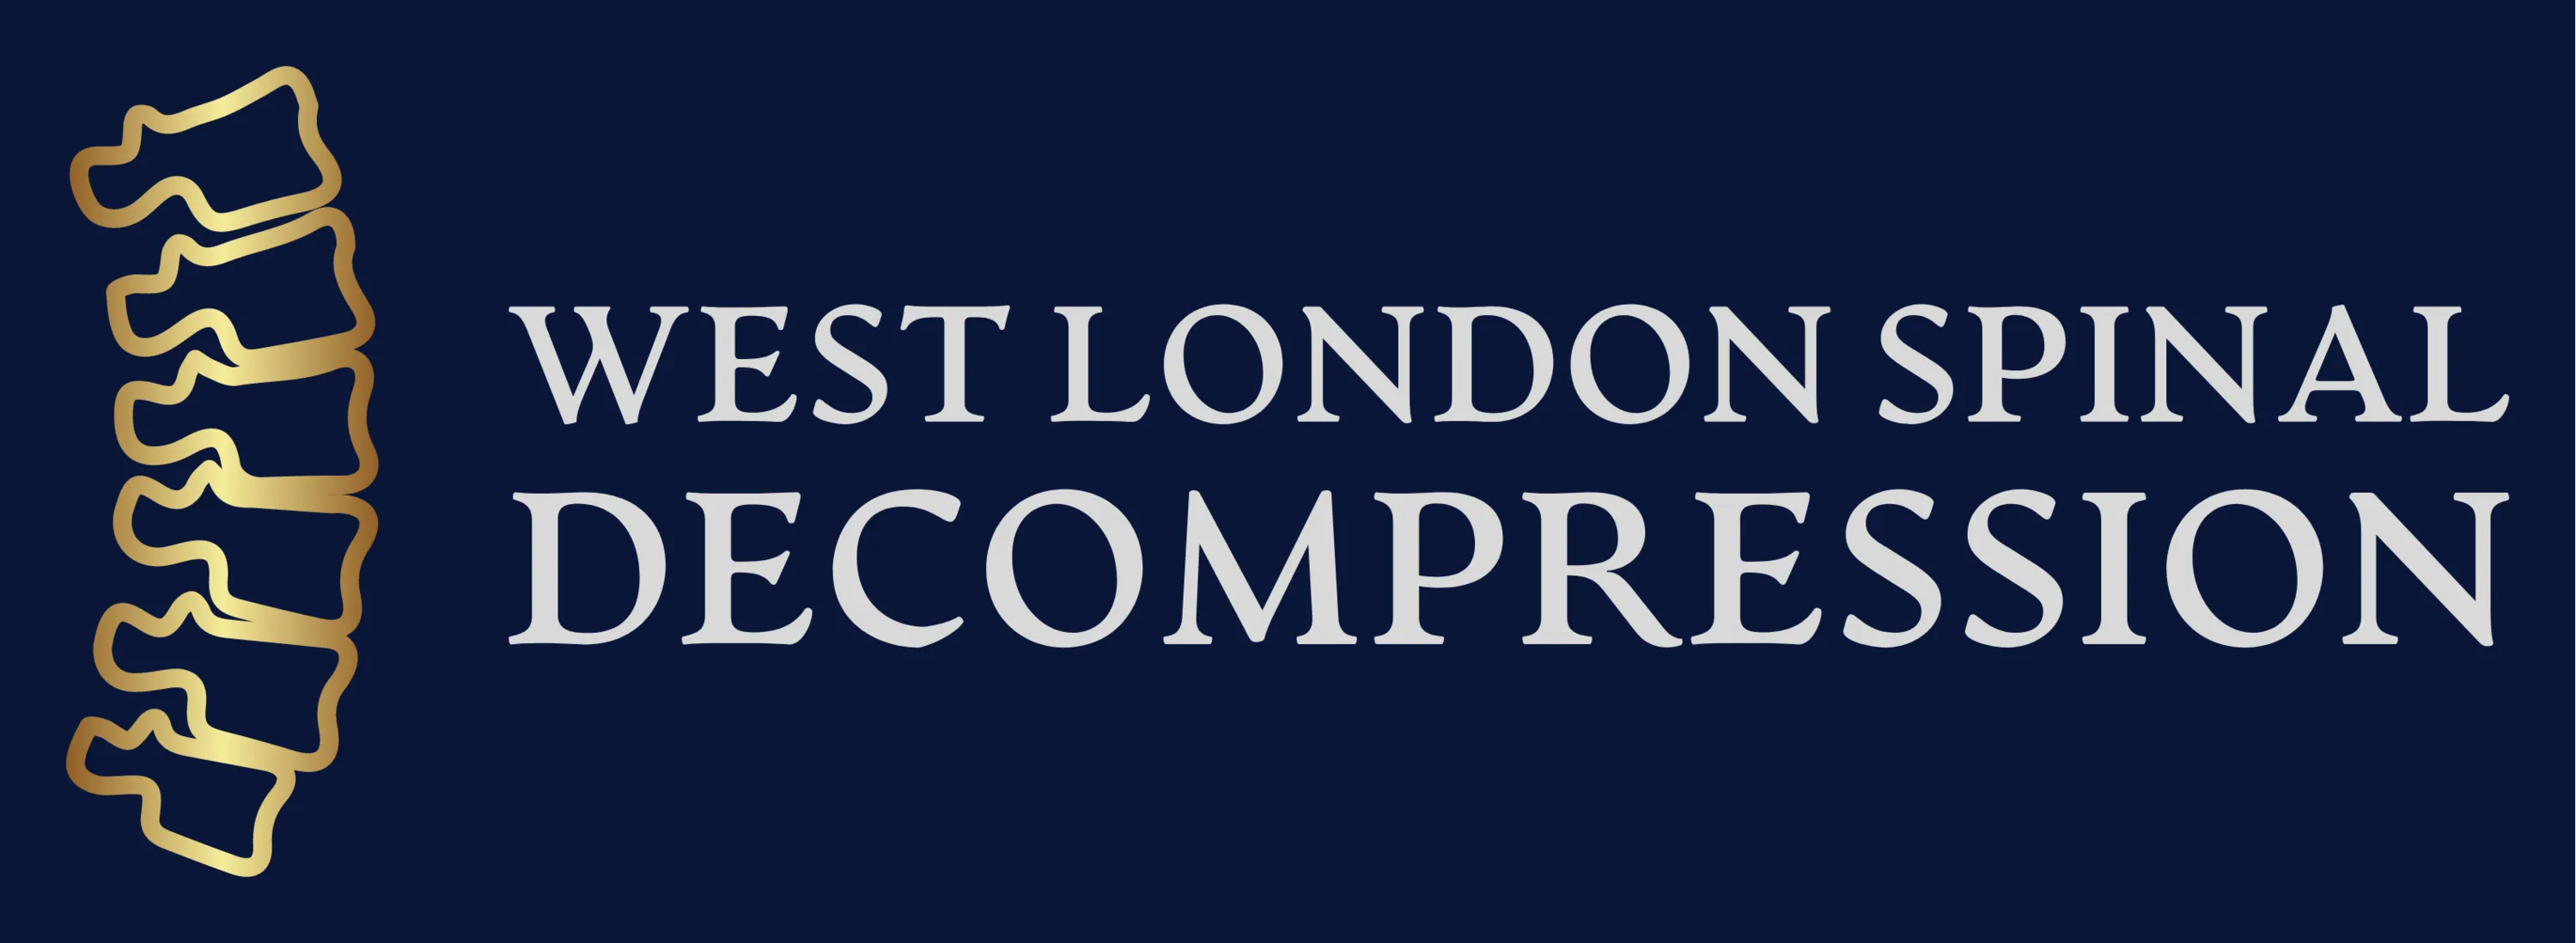 West London Spinal Decompression